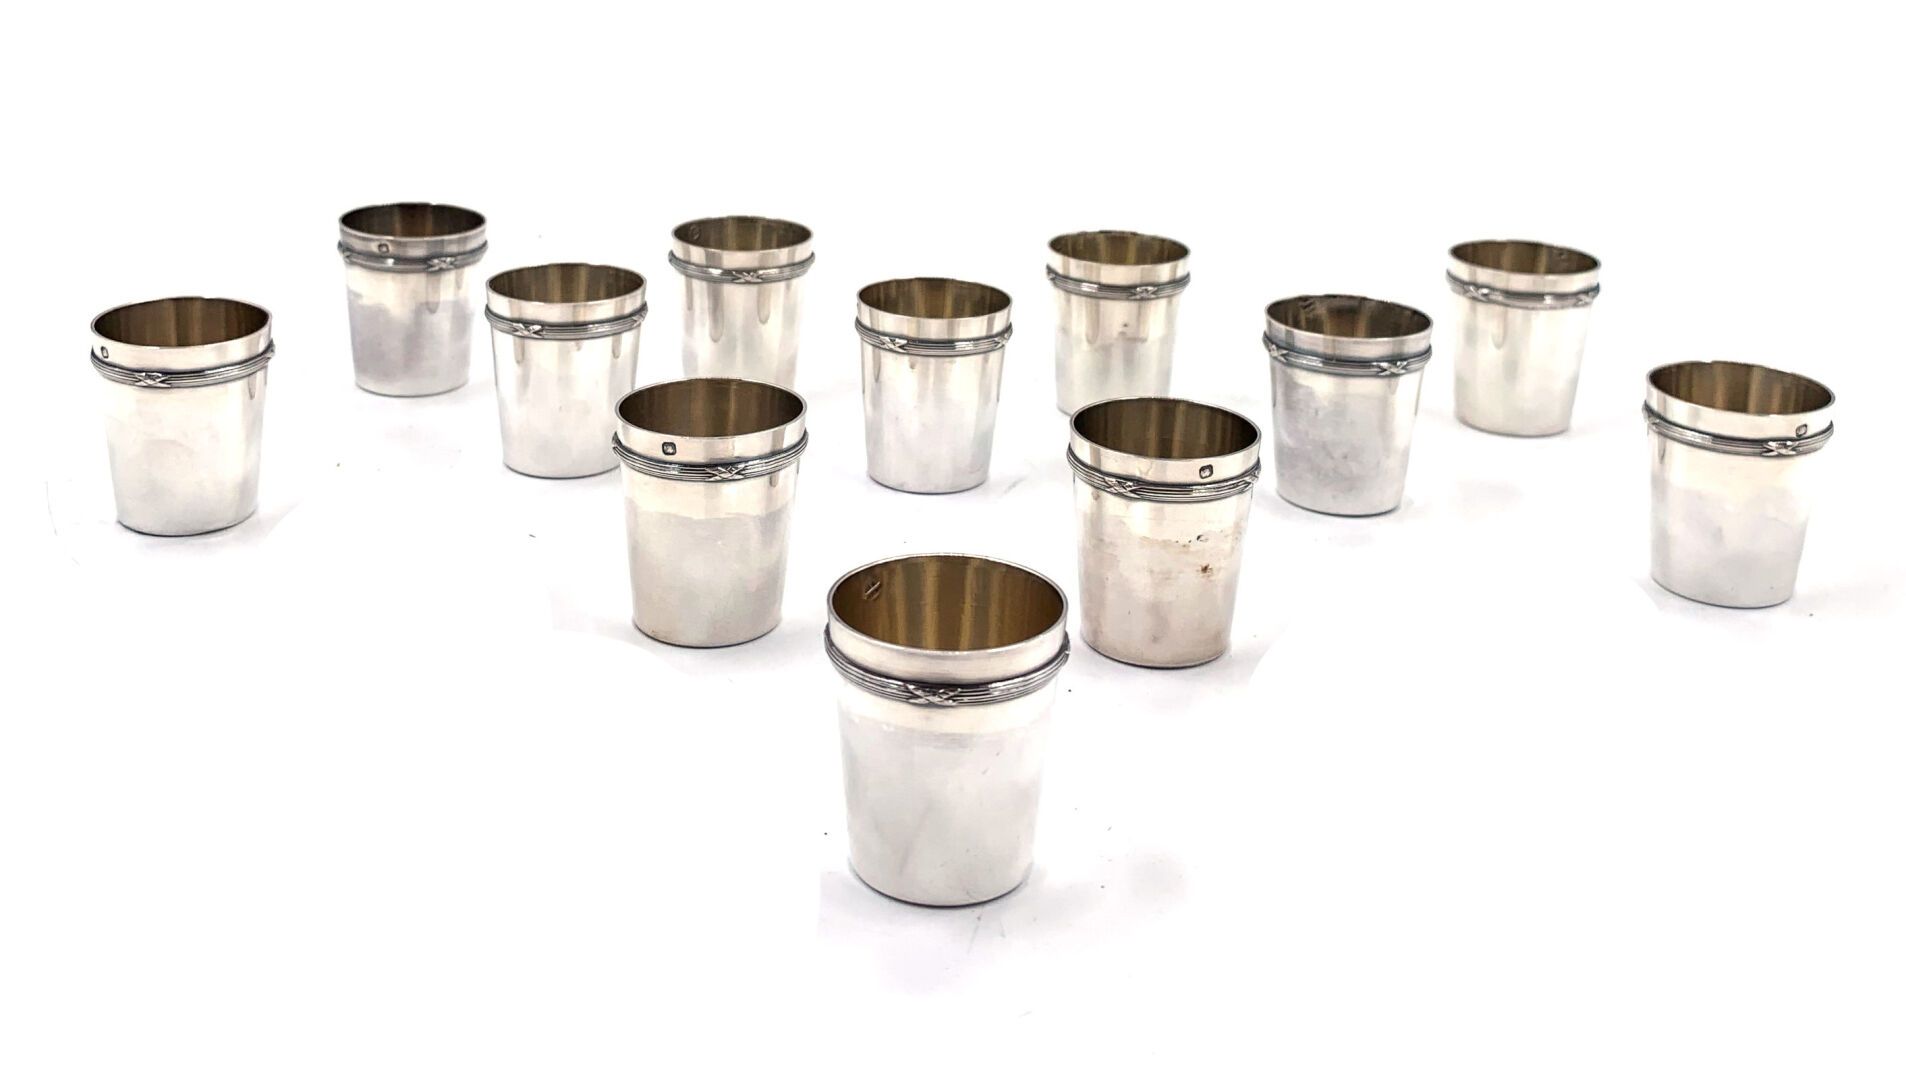 Null Suite of twelve small straight cups in plain silver 925 thousandths with de&hellip;